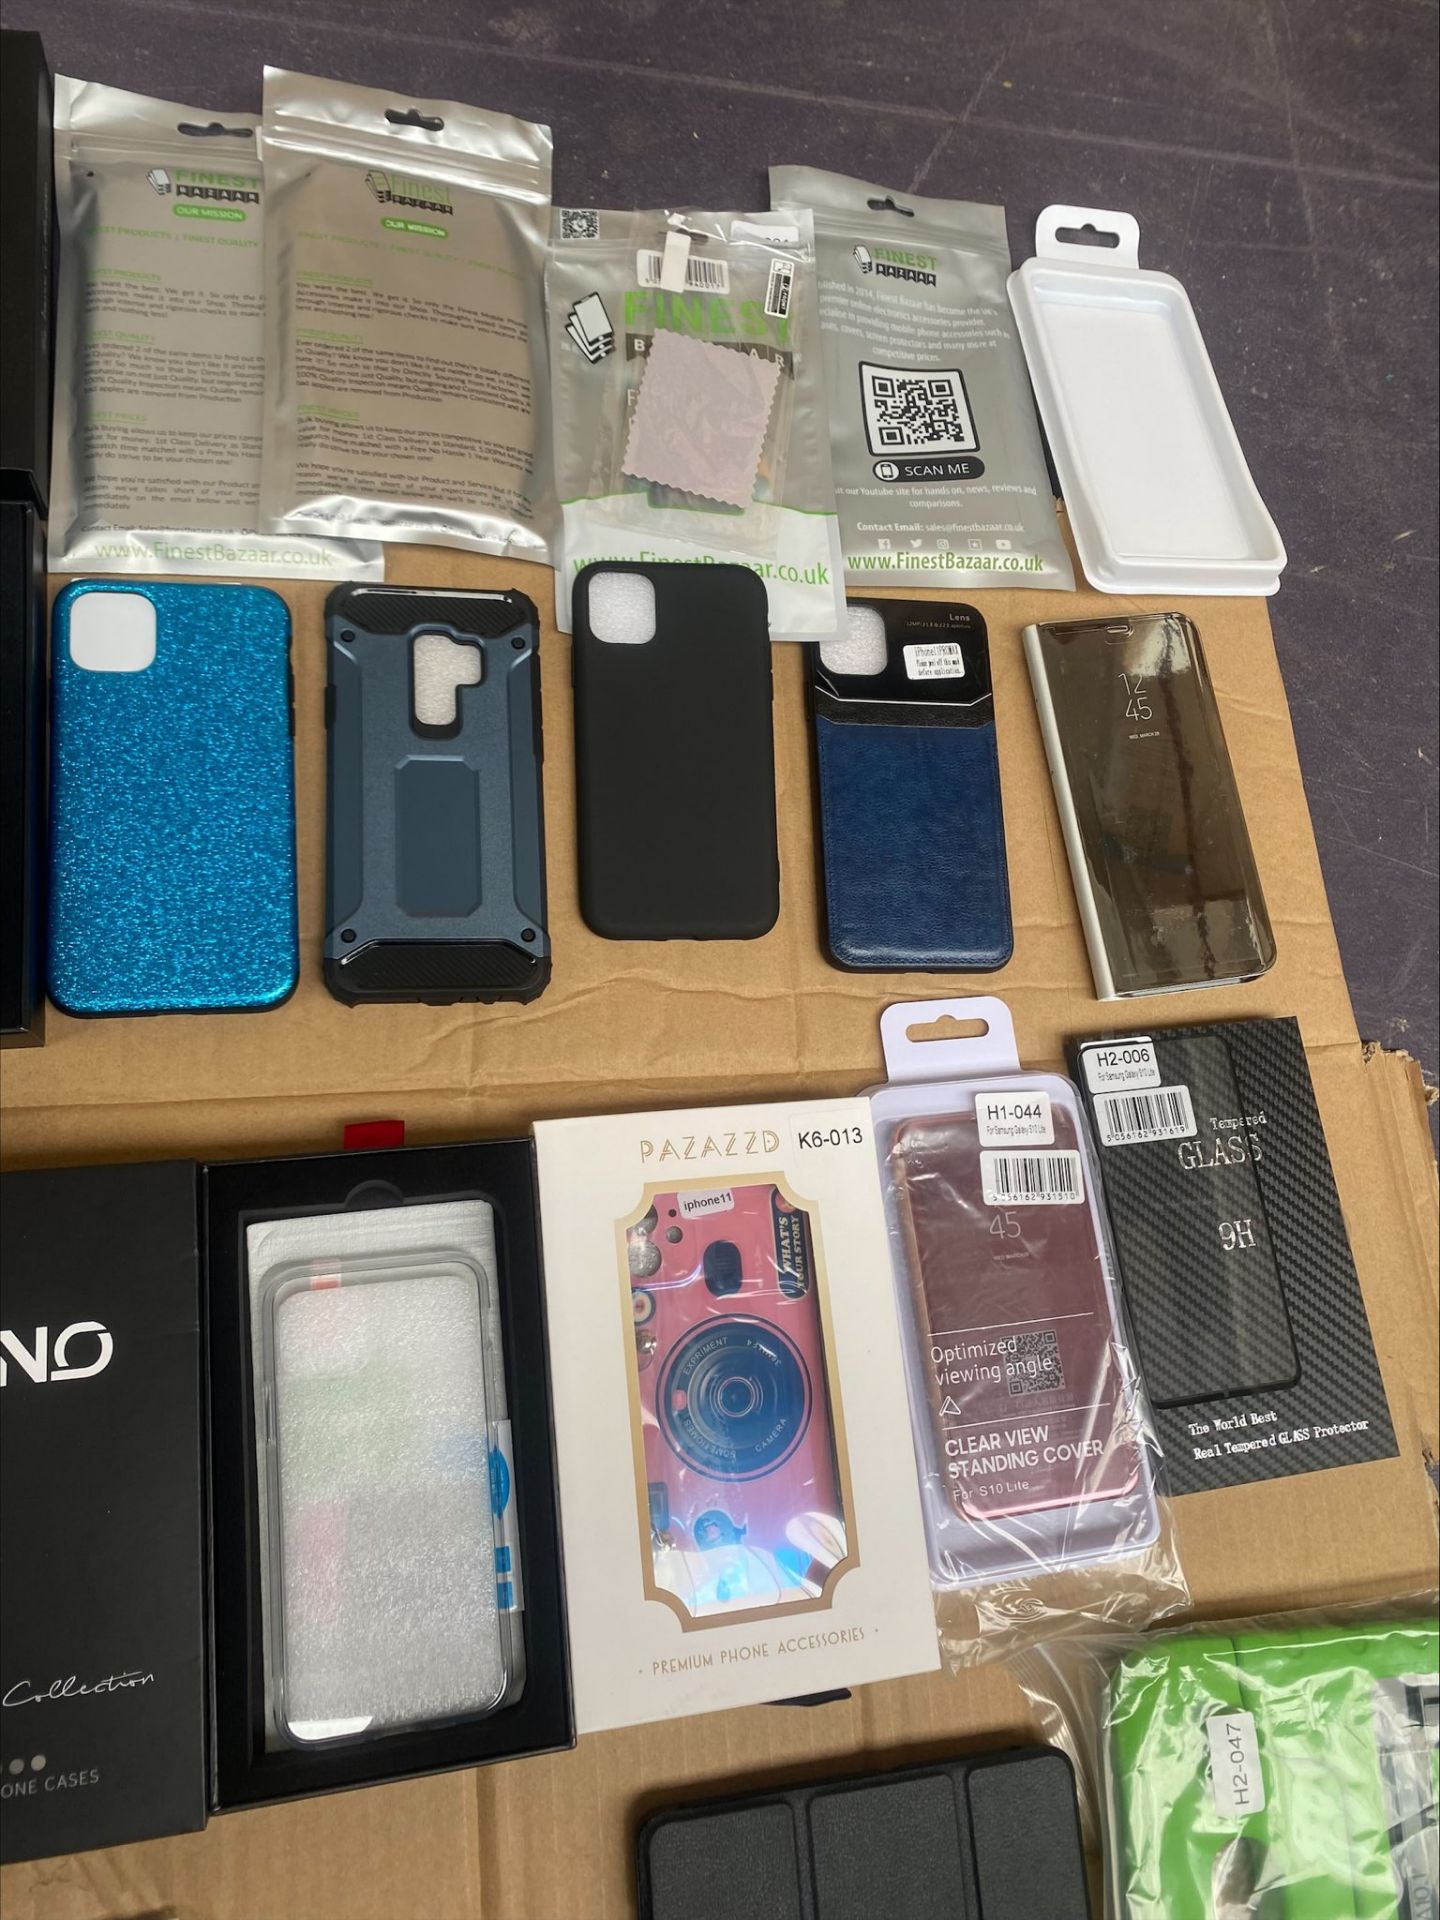 Job Lot 5K Units iPhone, Samsung, Air Pod, Apple Watch, Charging Cables, Phone Cover Accessories - Image 14 of 20